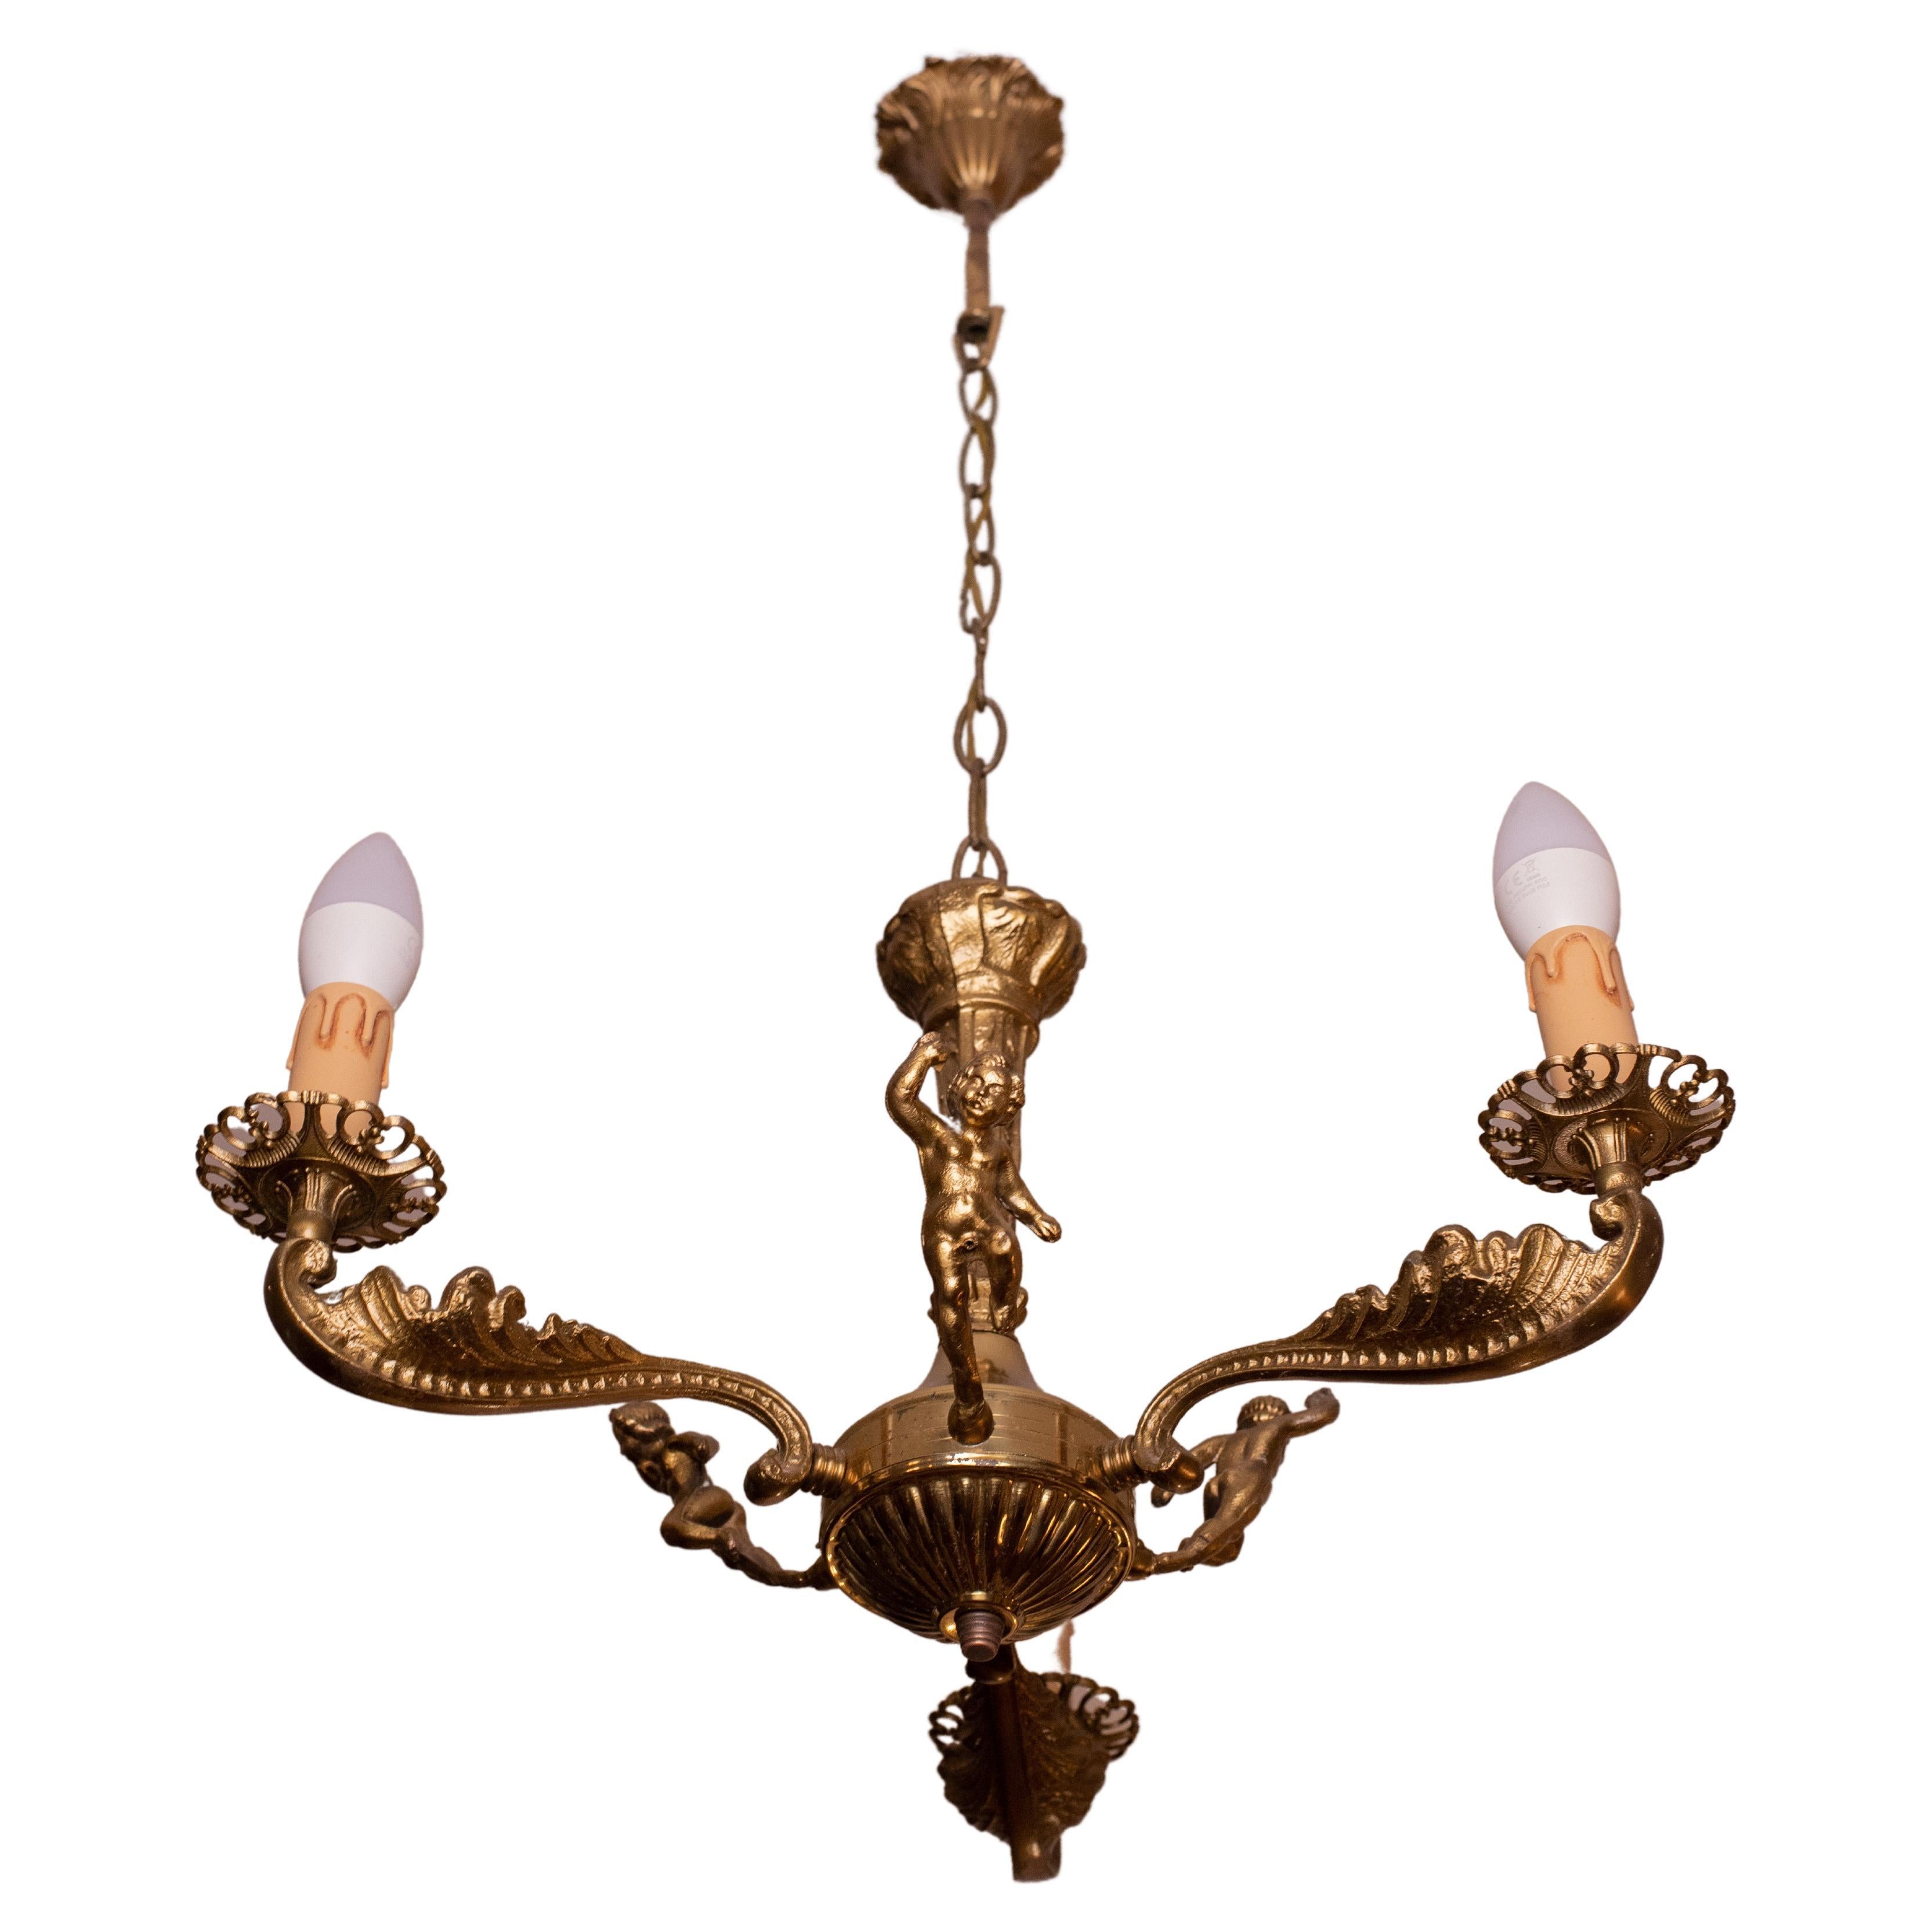 Antique Early 20th Century Italian Brass Chandelier with Kids